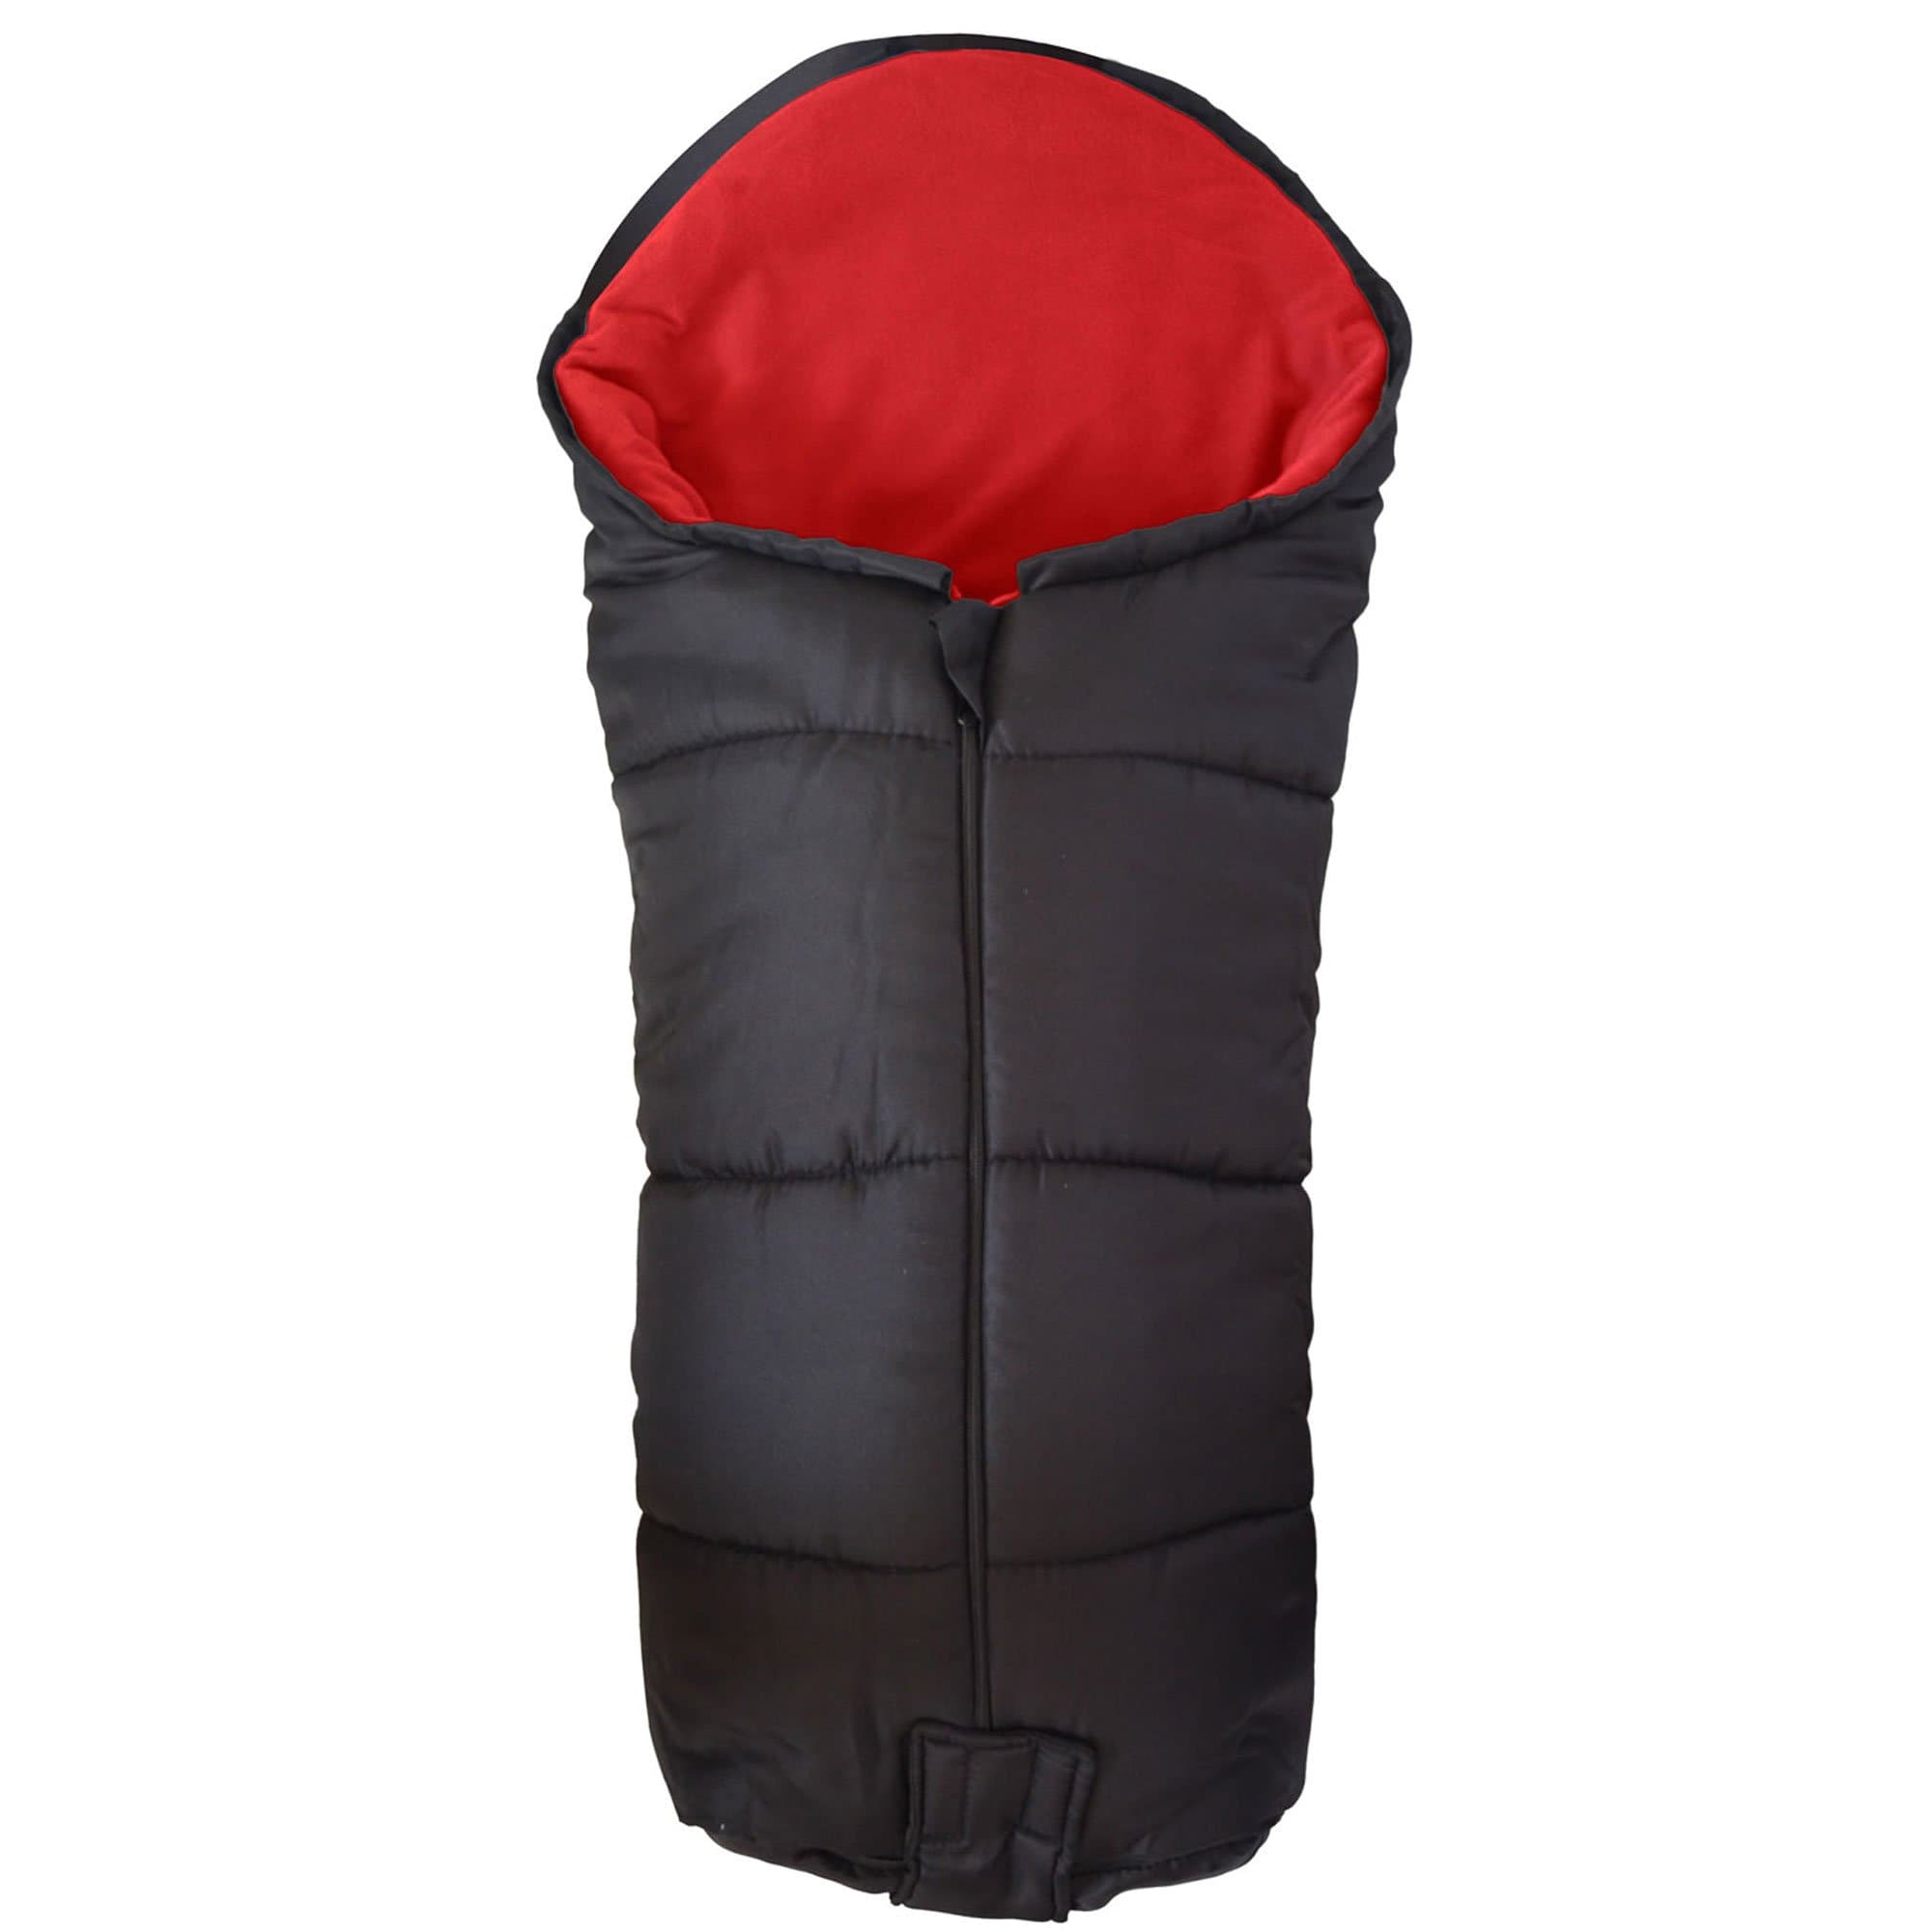 Deluxe Footmuff / Cosy Toes Compatible with Inglesina - Red / Fits All Models | For Your Little One